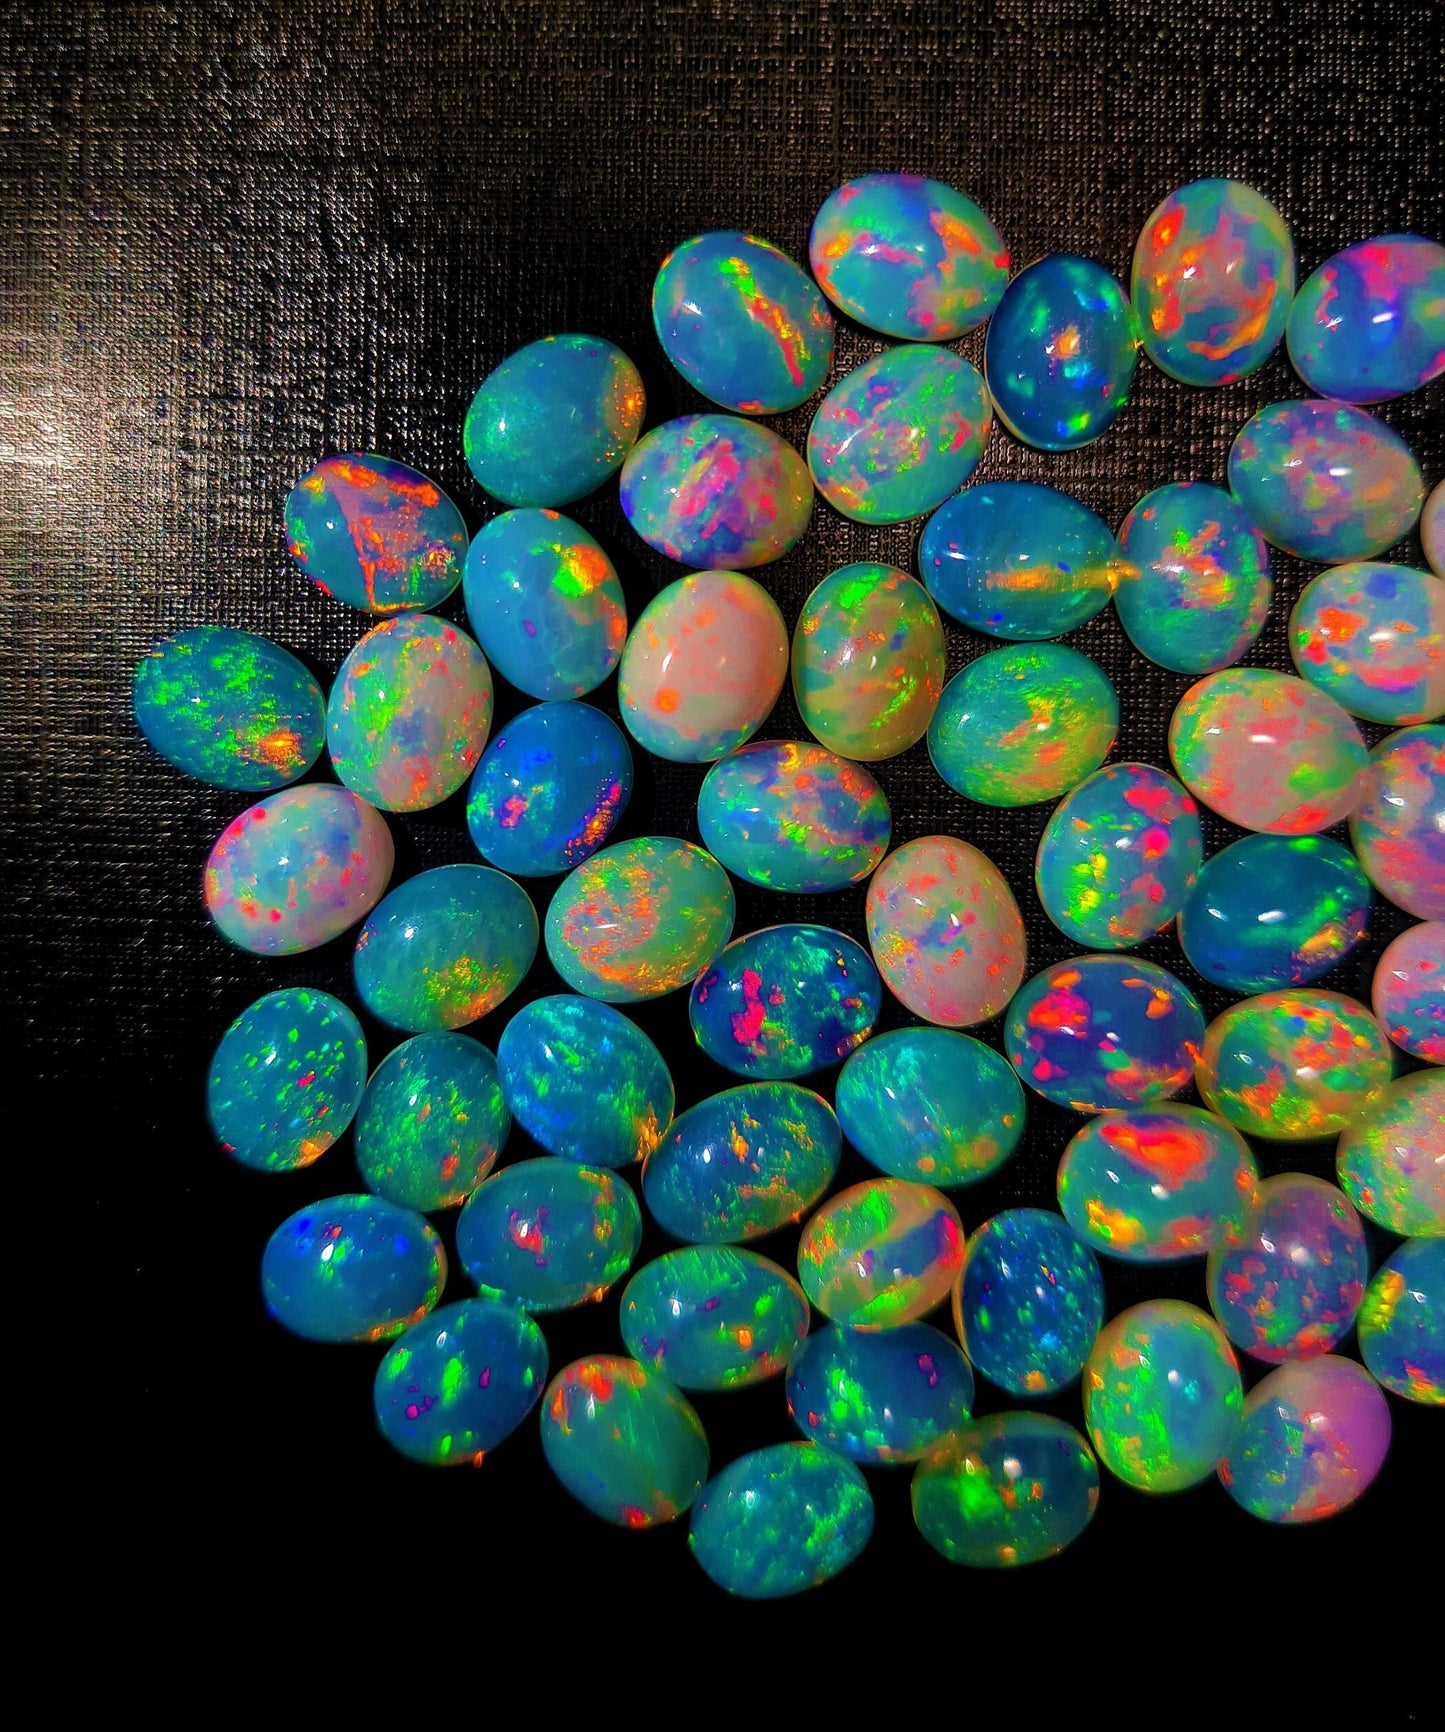 Natural Ethiopian Opal 8x10 mm Oval Gemstone Cabochon, Calibrated Opal Stone, Multi Fire Opal Loose Stone For Jewelry Making.